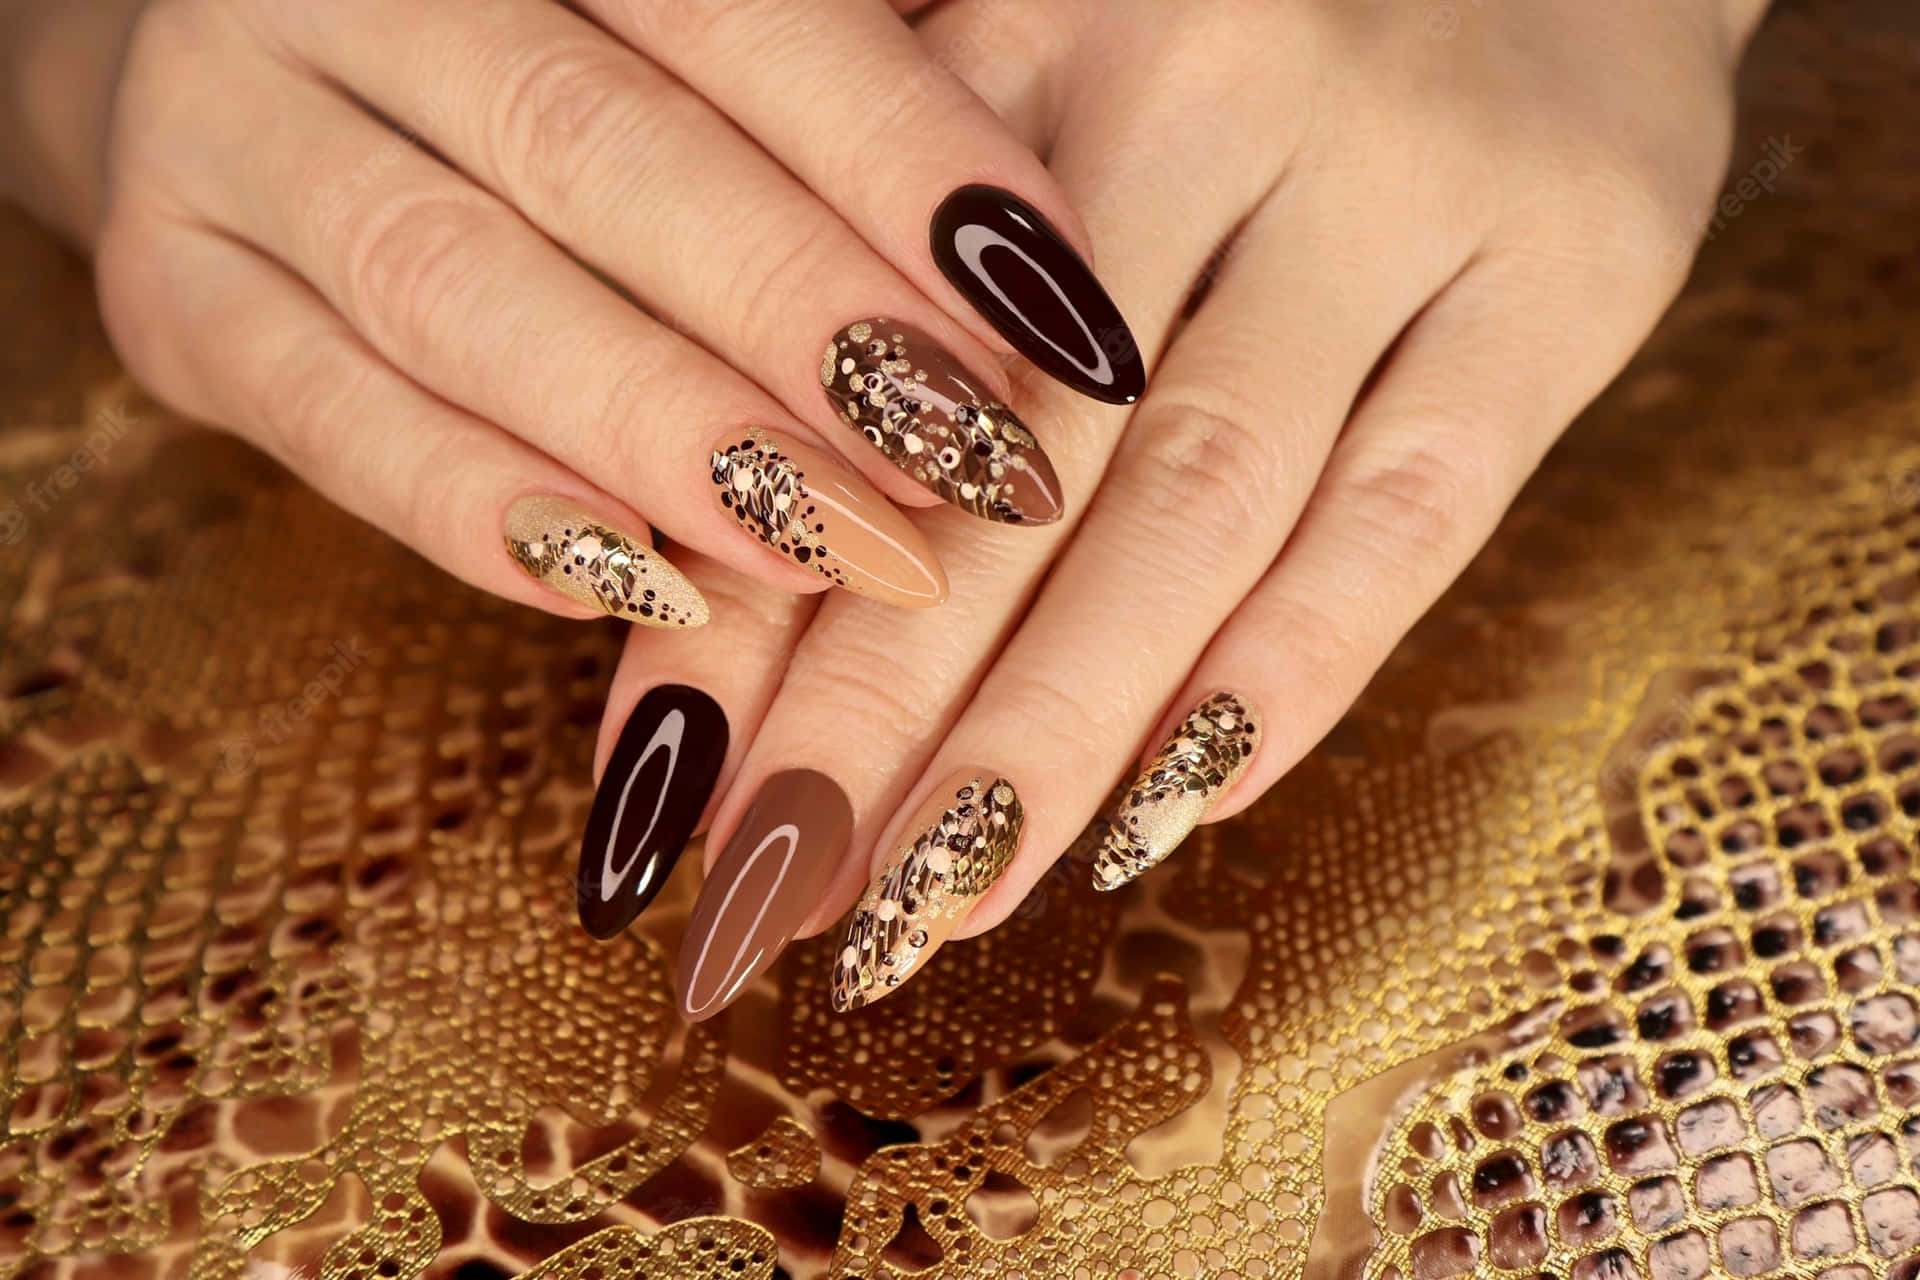 A Woman's Hands With Brown And Gold Nails